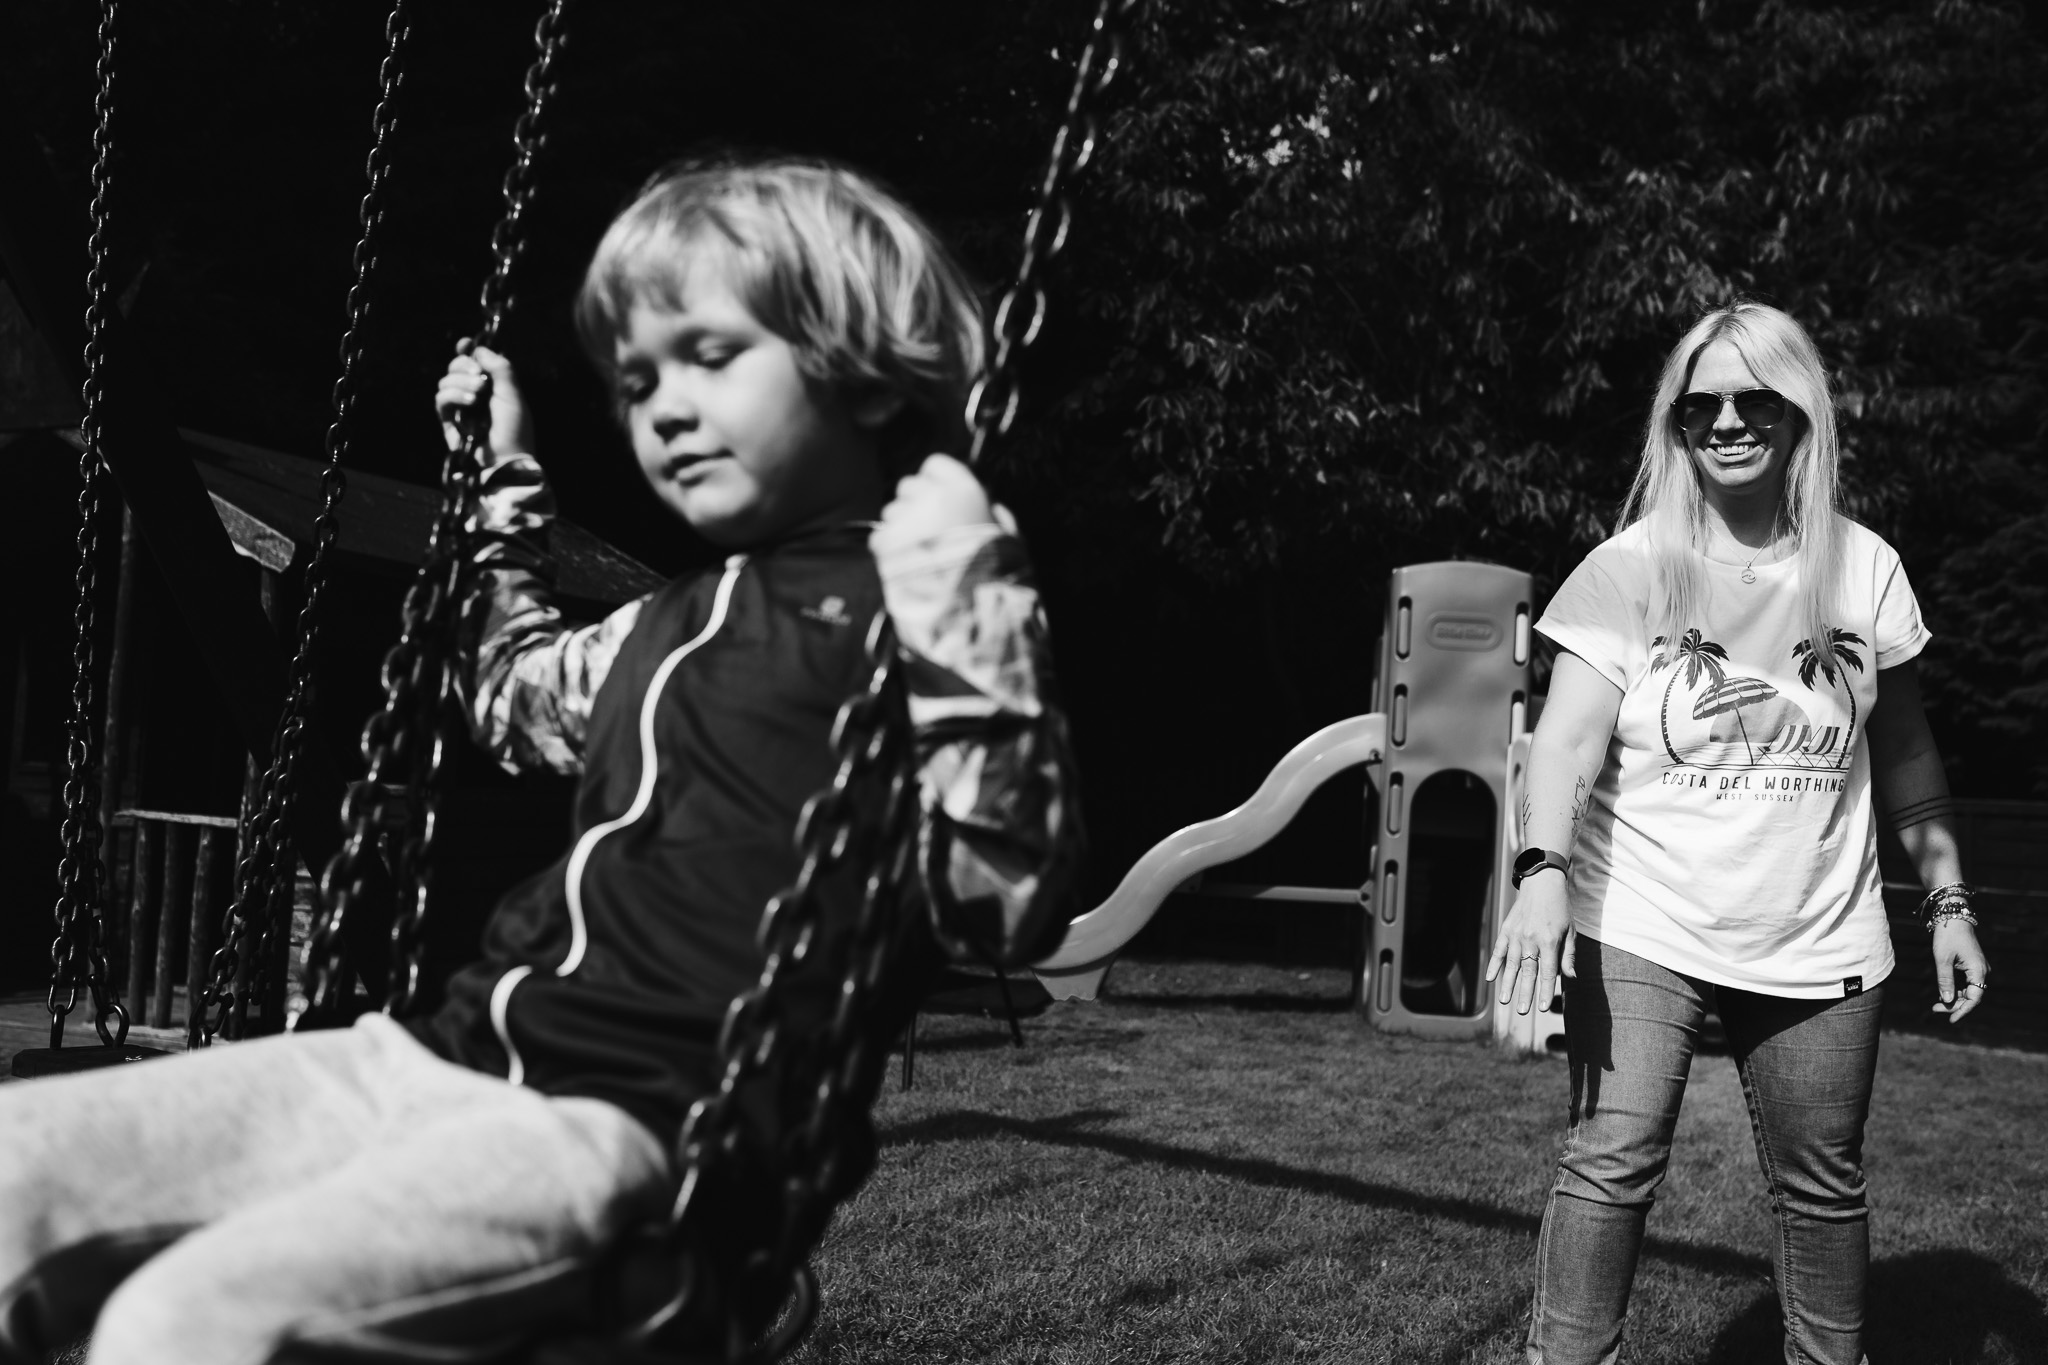 Mum pushing a young boy on a swing during a family photo session.